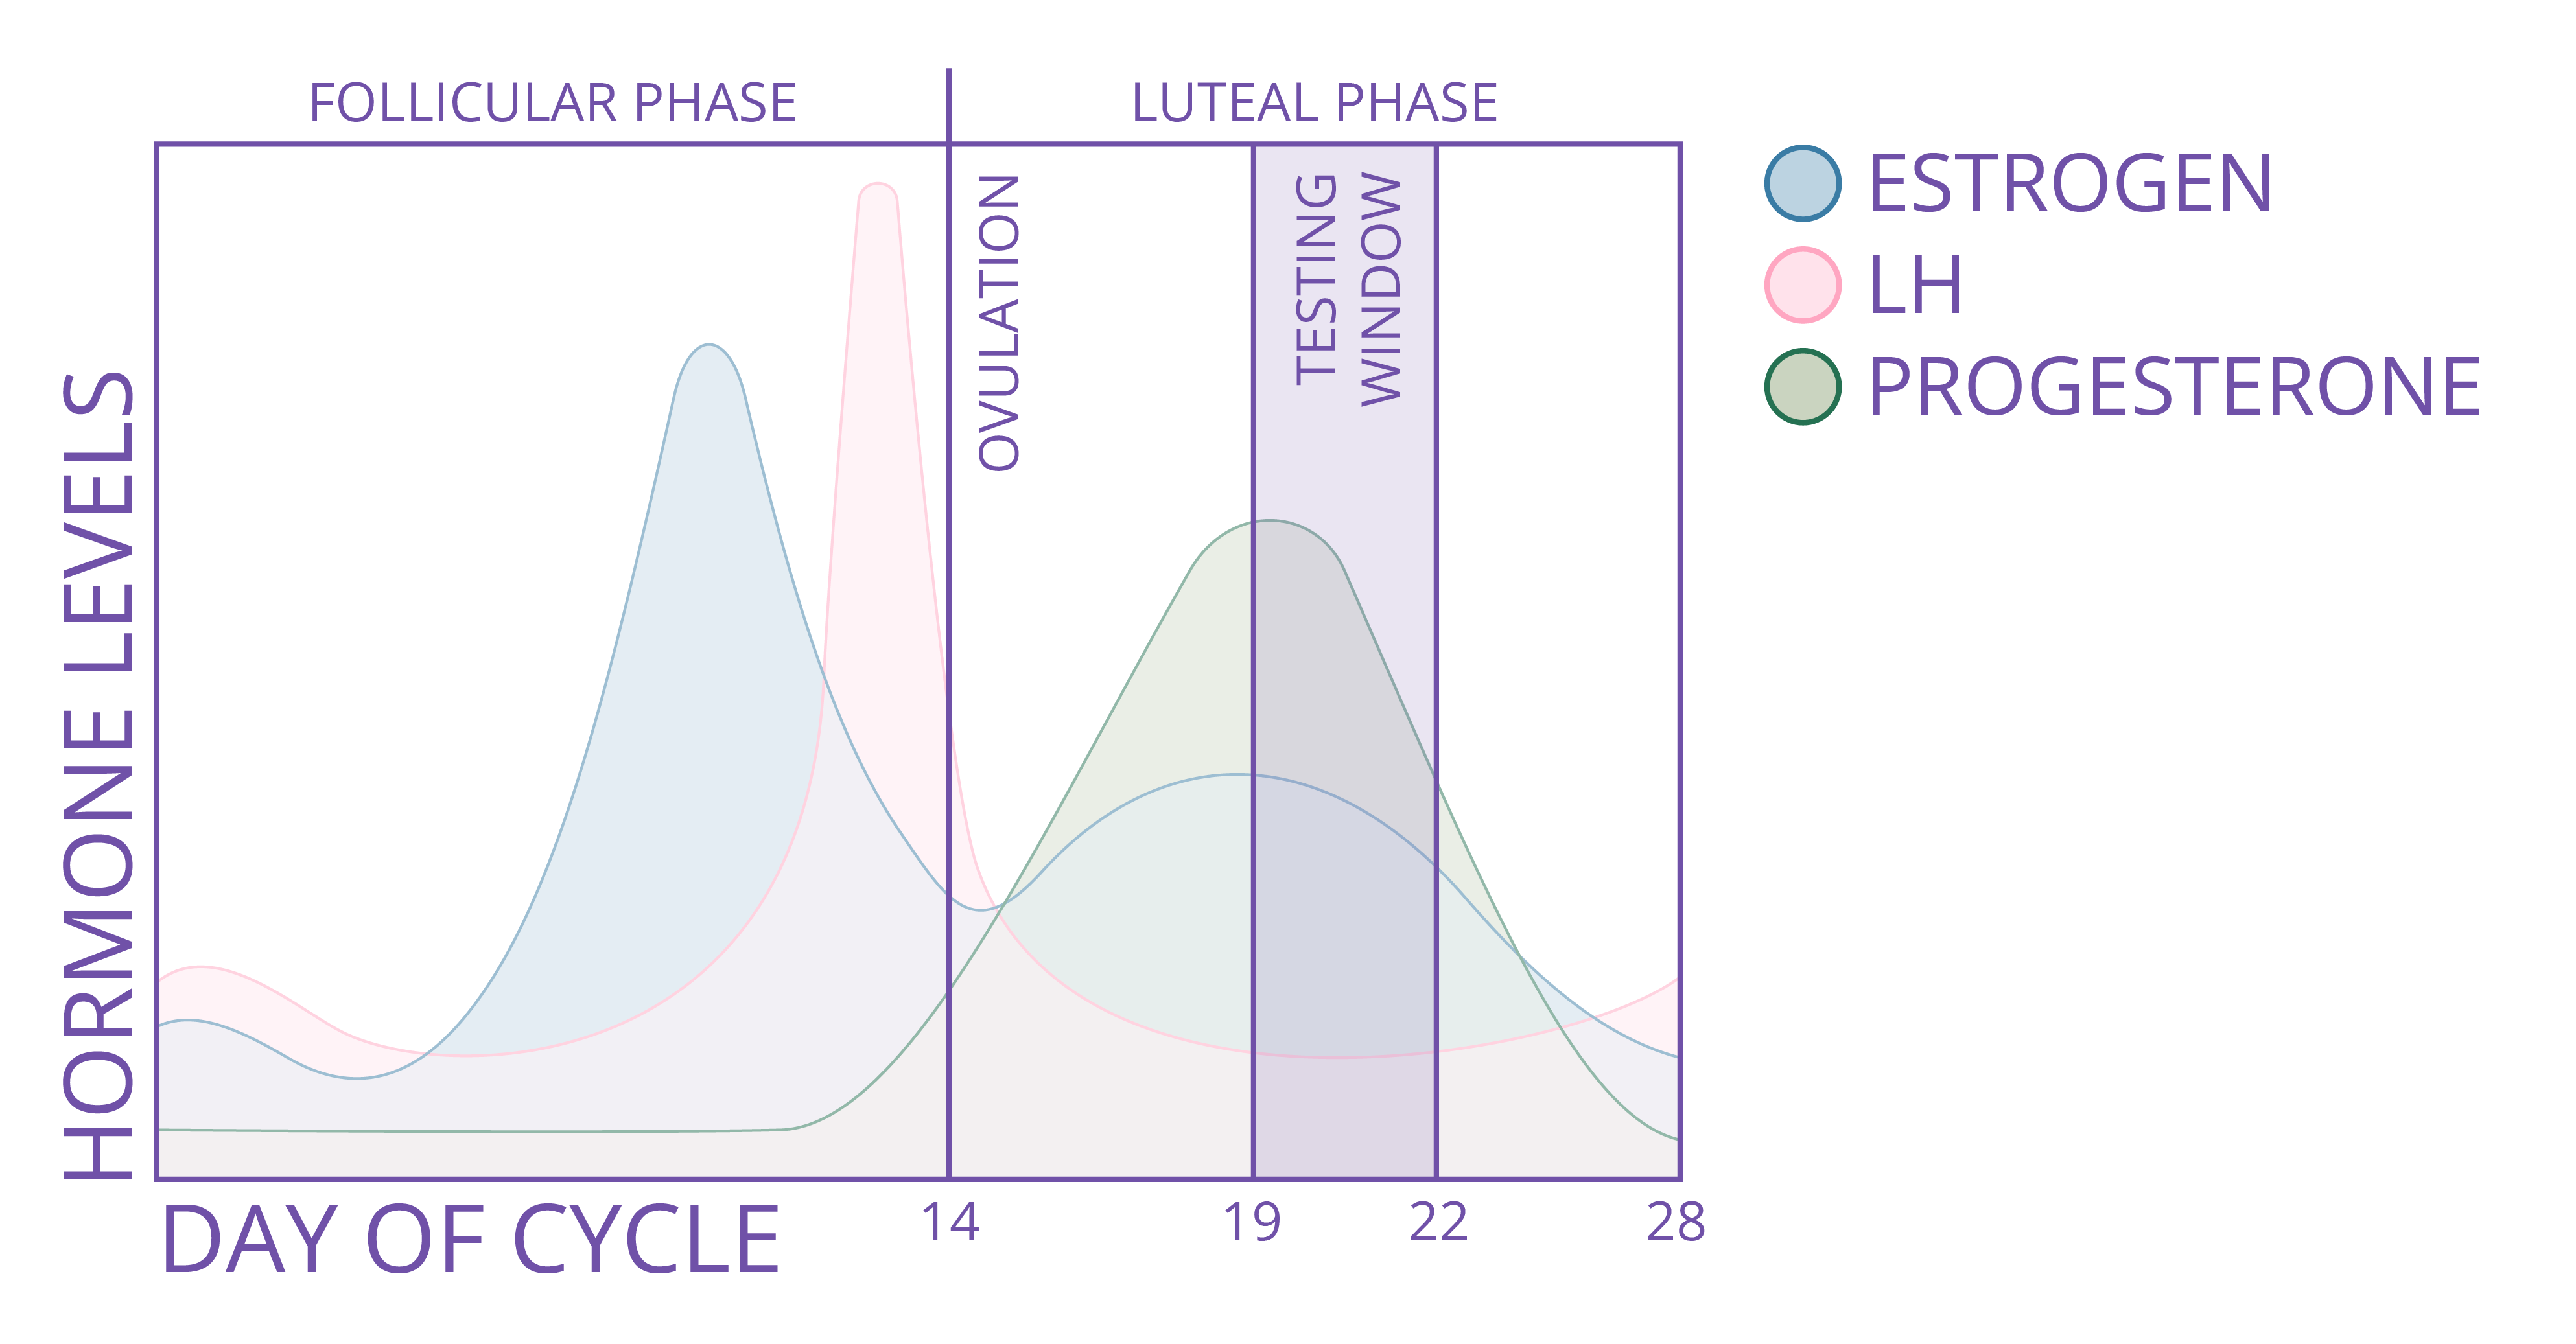 Menstrual cycle effect (follicular, luteal phase) on the results